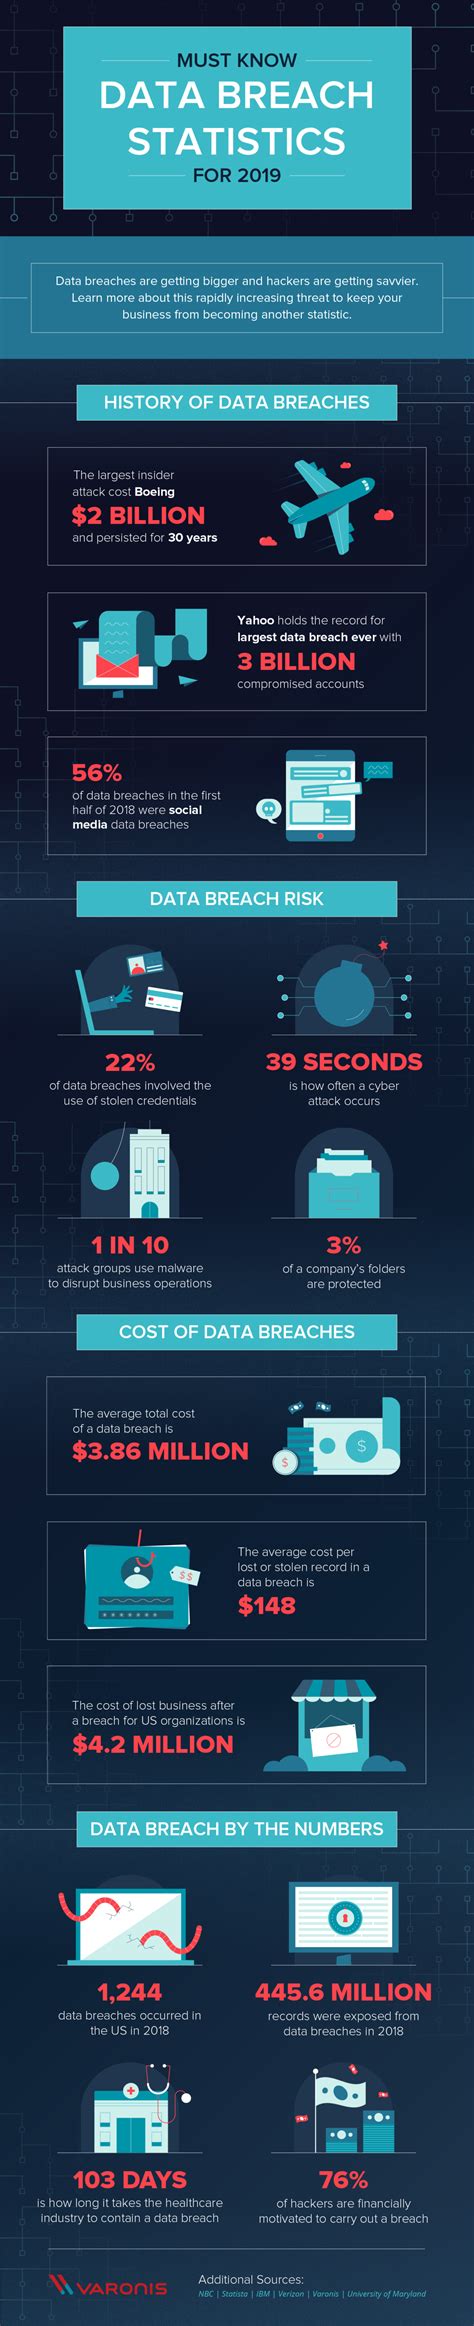 56 Must Know Data Breach Statistics for 2019 #infographic - Visualistan